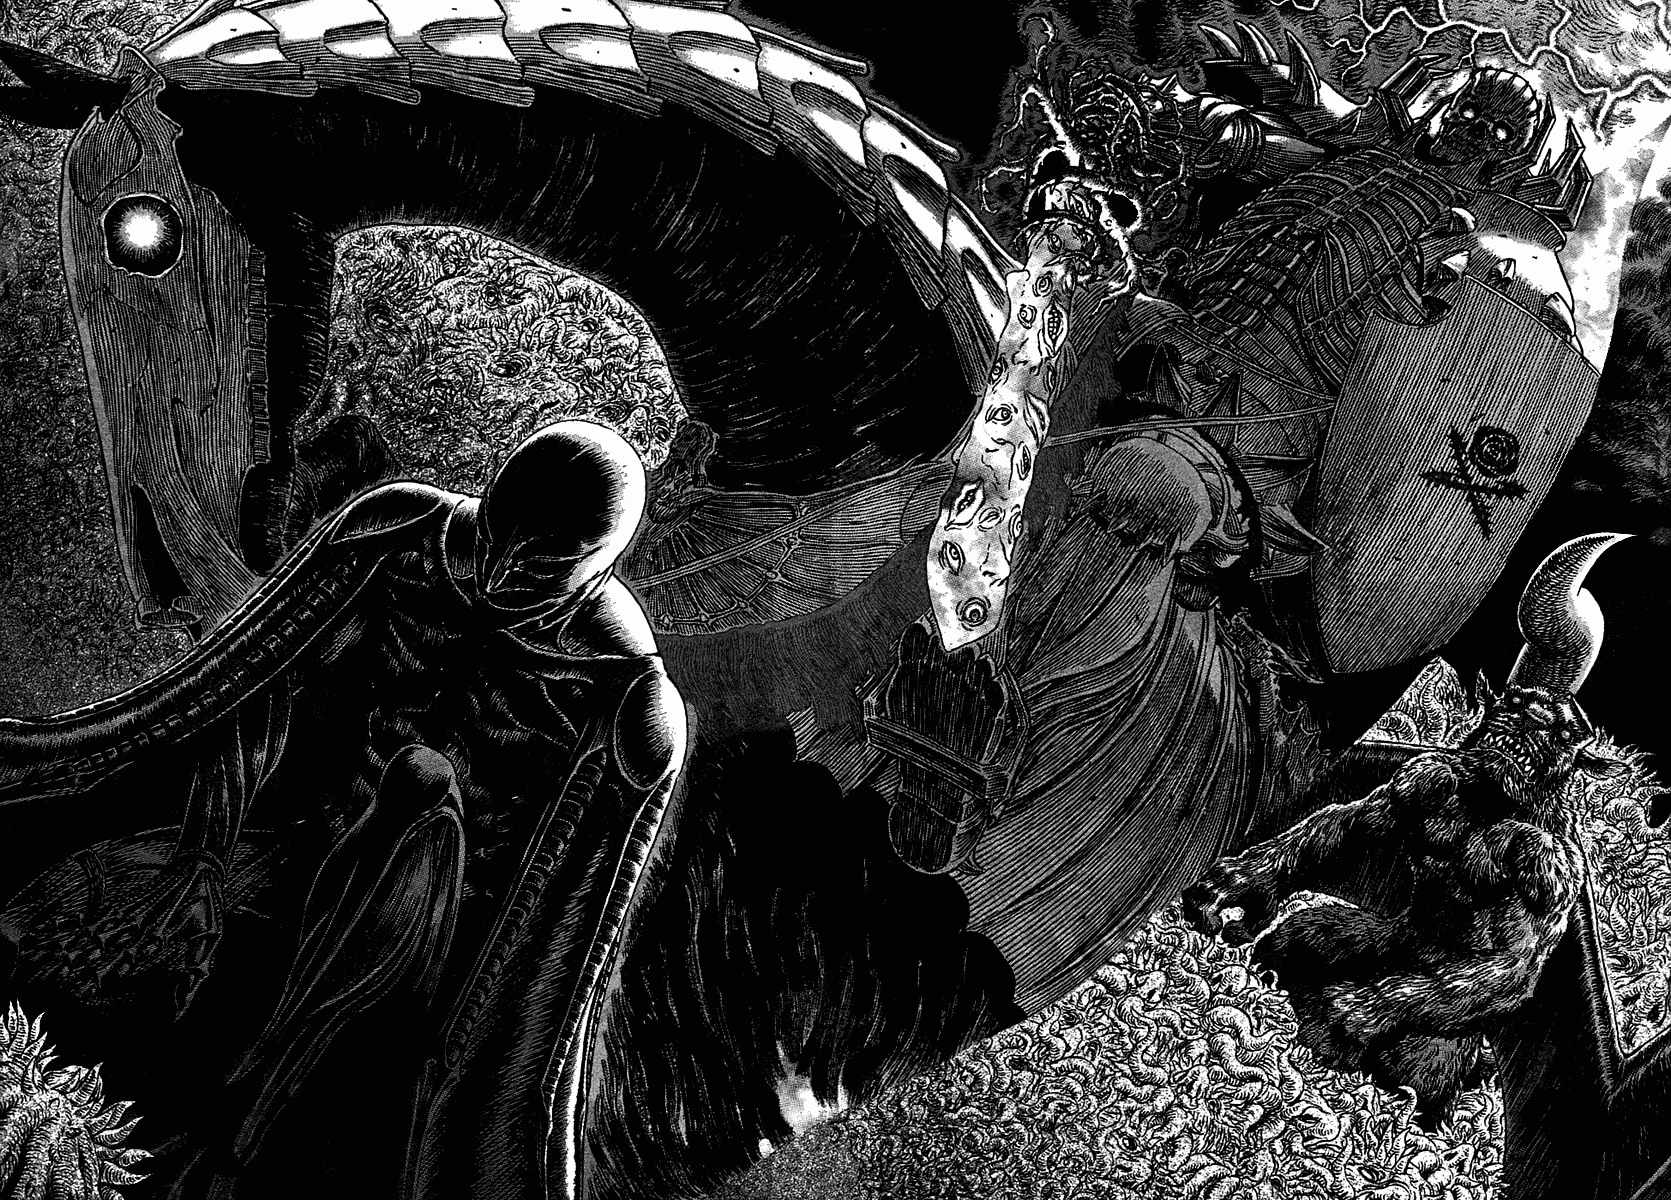 Skull Night appearing out of nowhere behind Femto and going in to slice him with his Behelit sword from Berserk